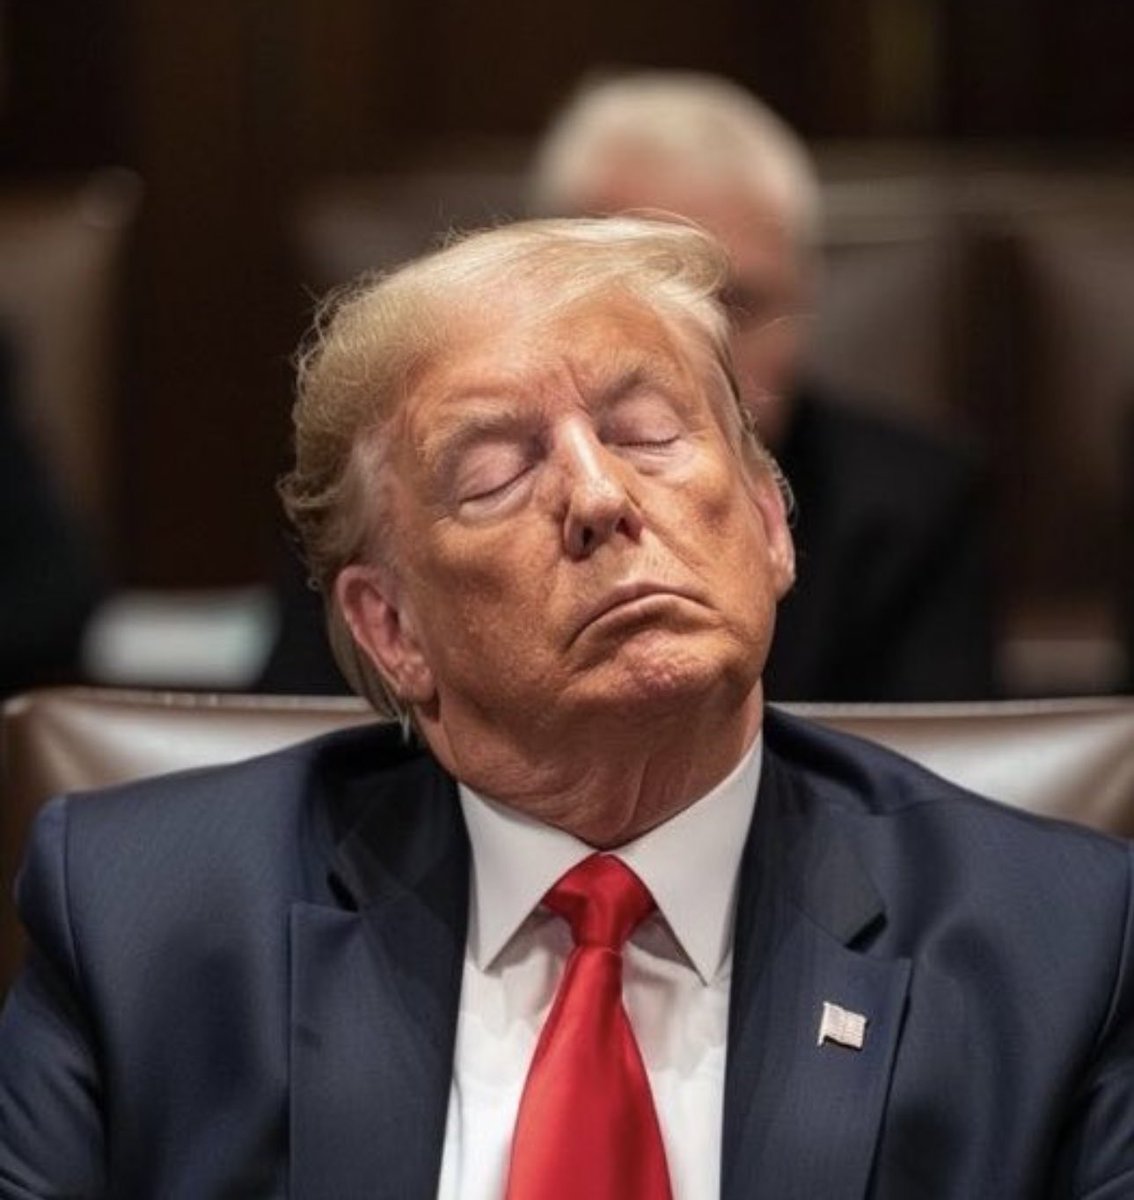 Grandpa needs his nap time. It won’t make a difference in the trial. But is this old shithead someone you want leading anything? He isn’t dead, is he?